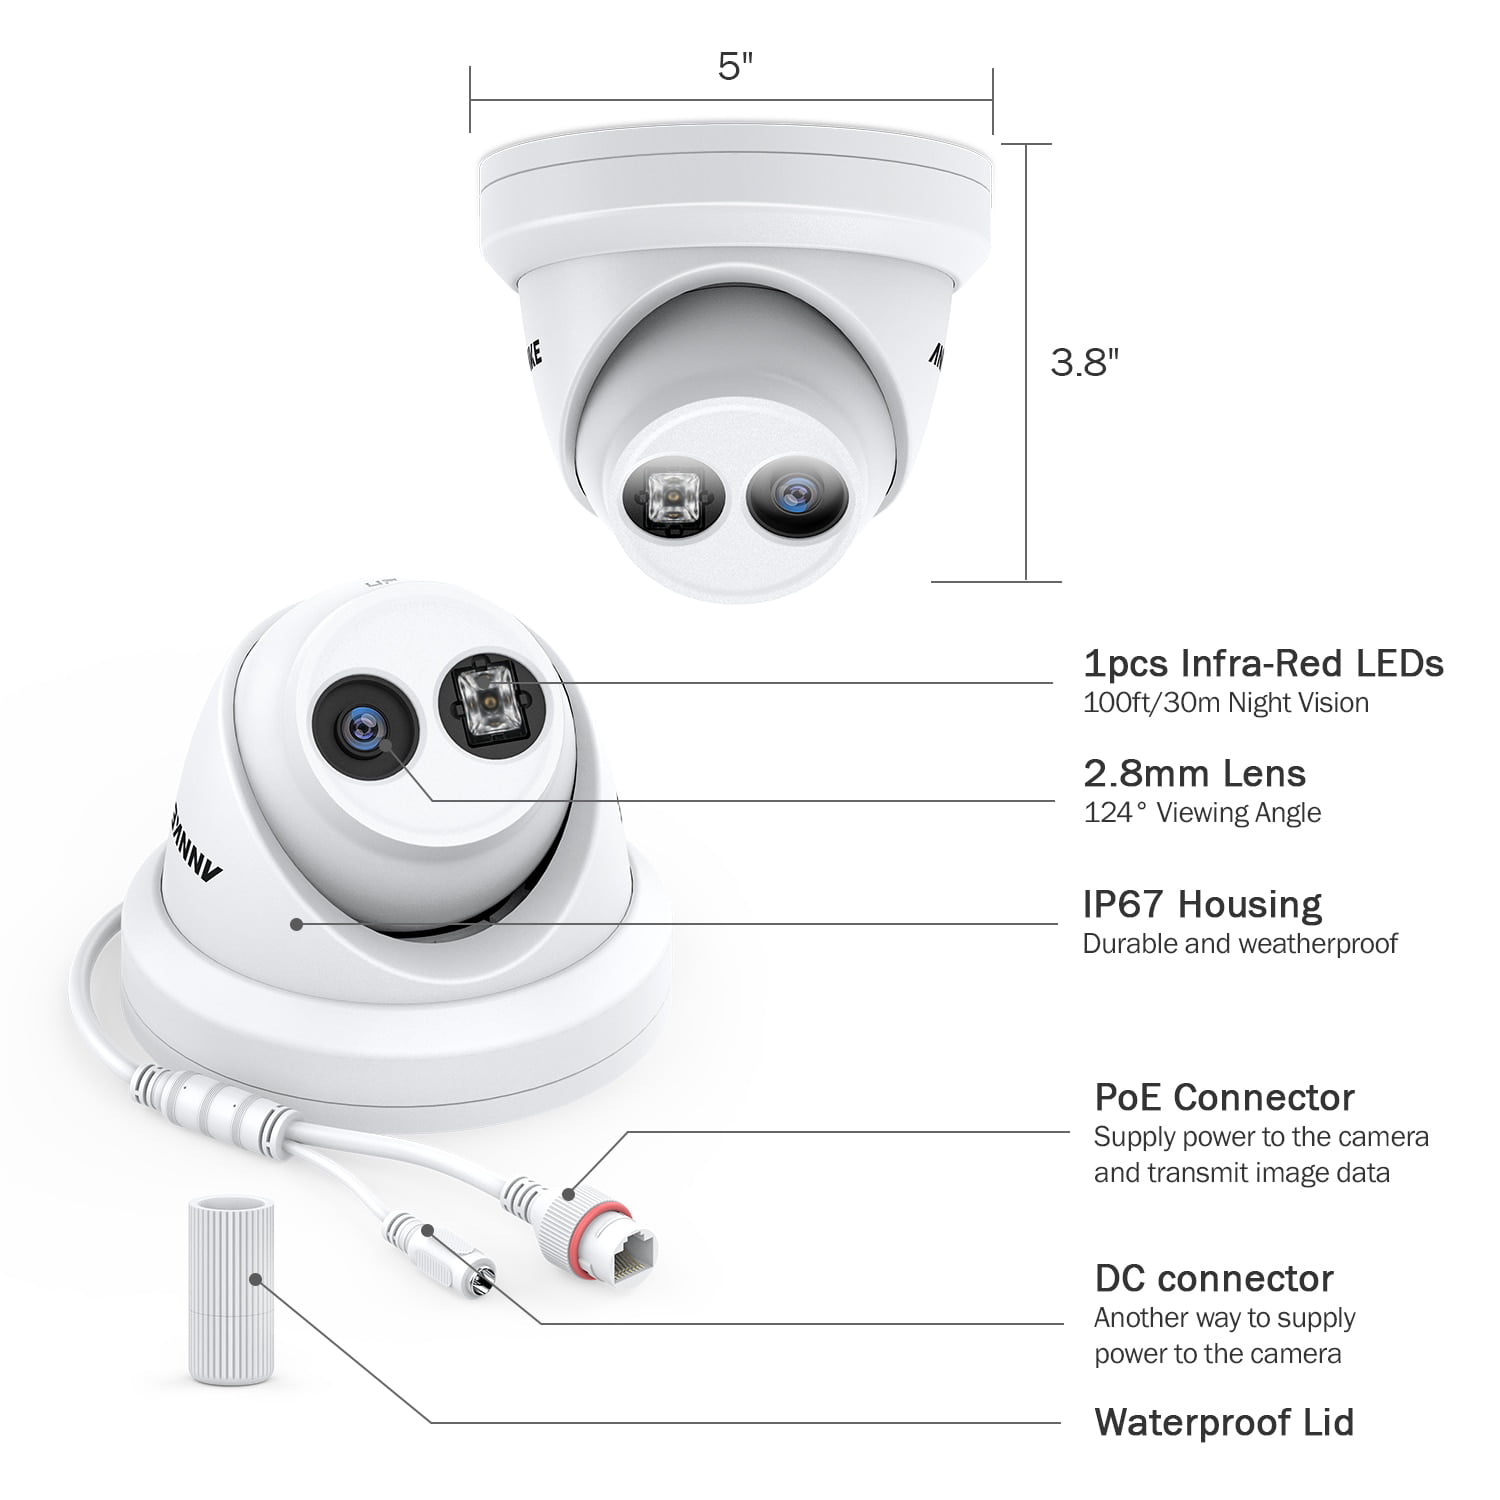 Details about   Unbranded CCTV Security Camera W/ 3-8 mm Lens